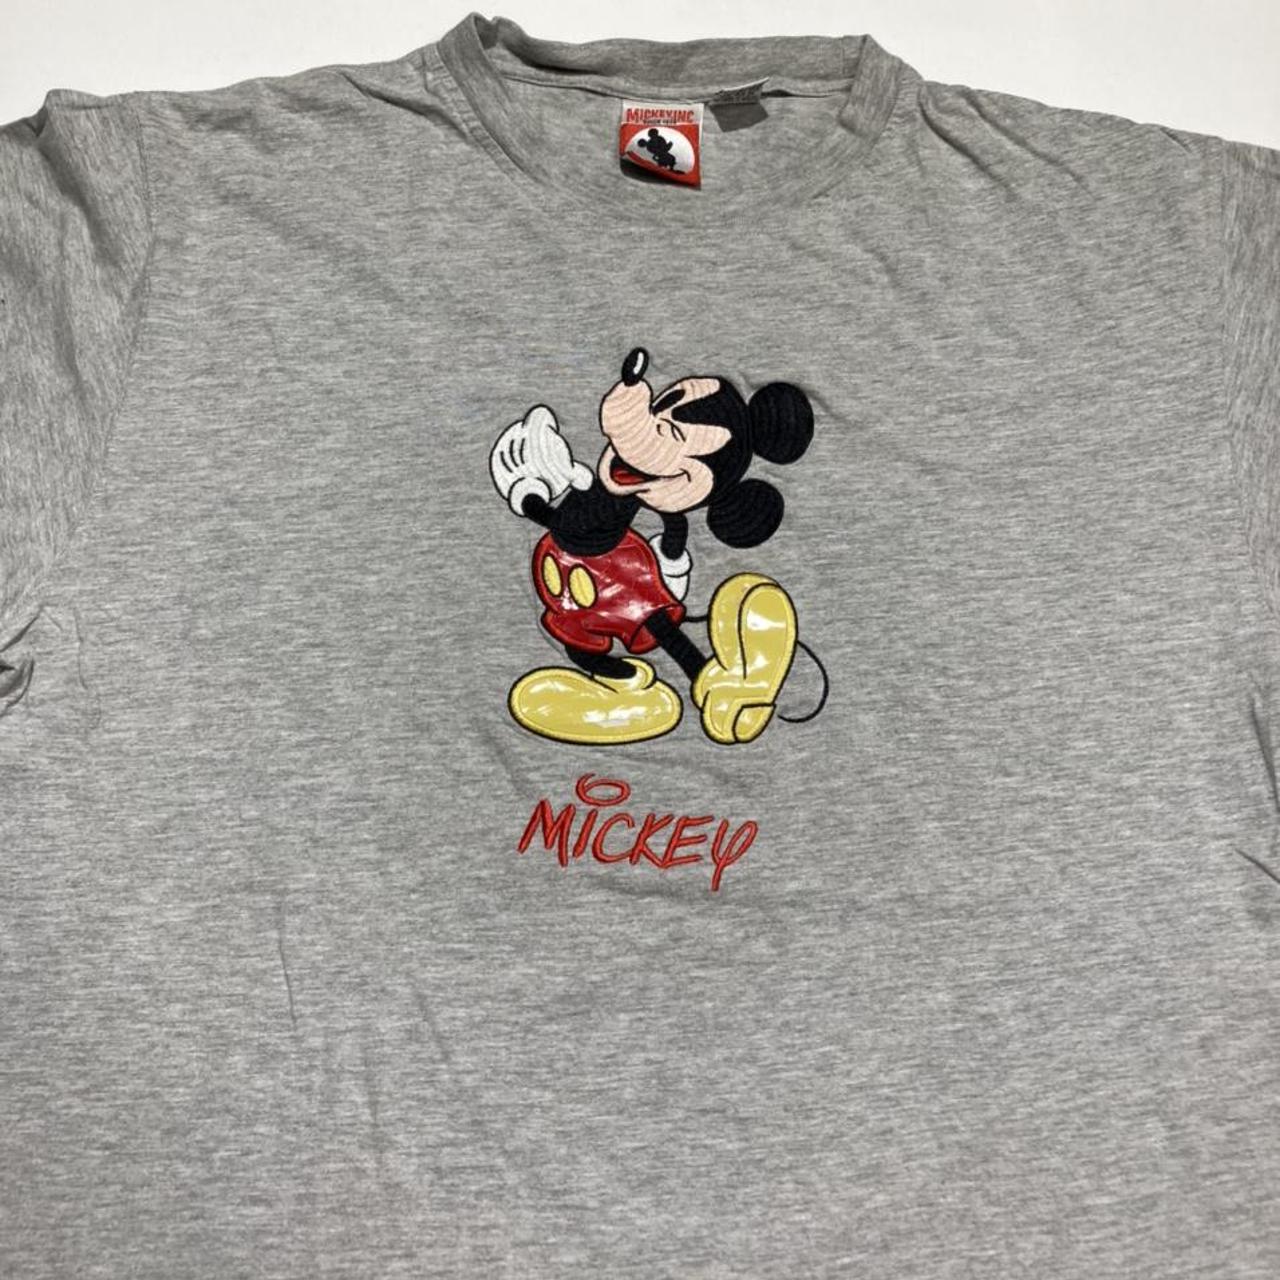 Product Image 3 - Vintage Mickey Mouse embroidered graphic